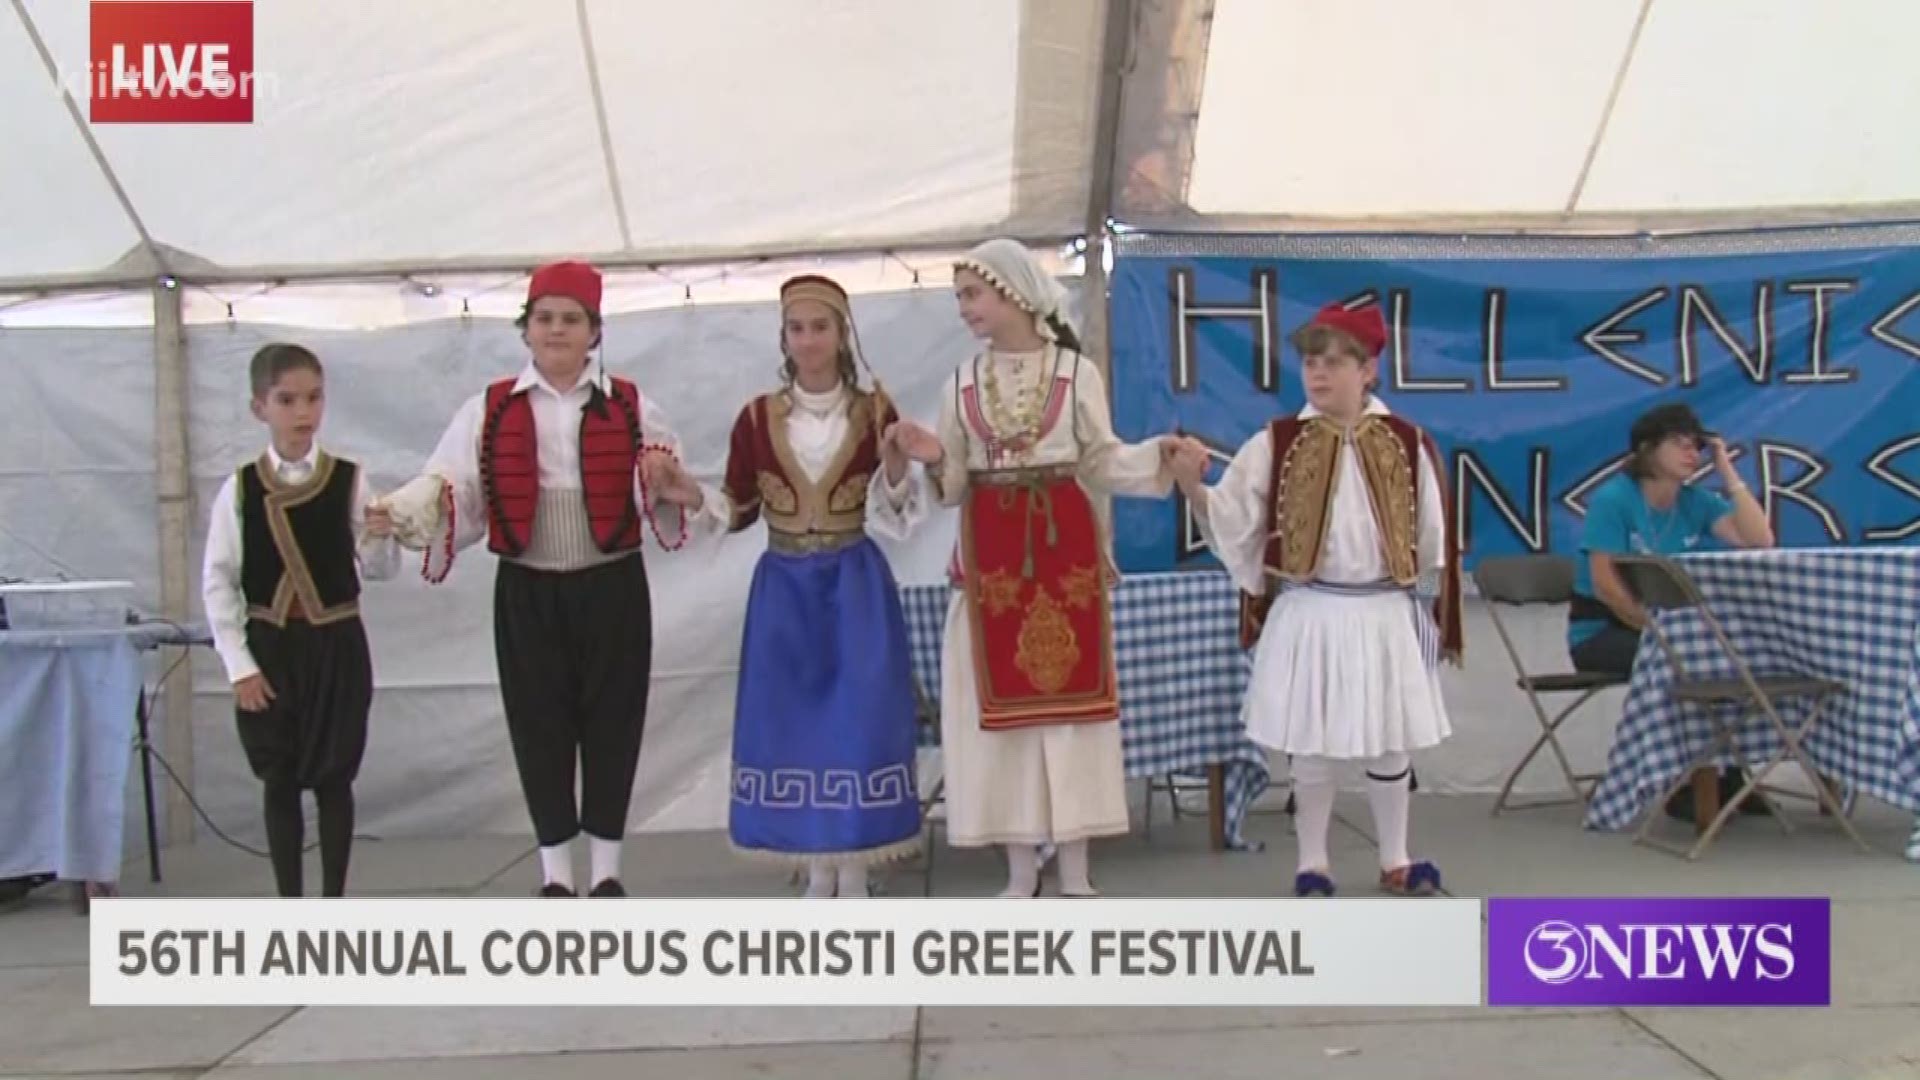 The Greek Festival will feature dancing, traditional Greek music, a gift shop, and traditional Greek suppers and sweets.